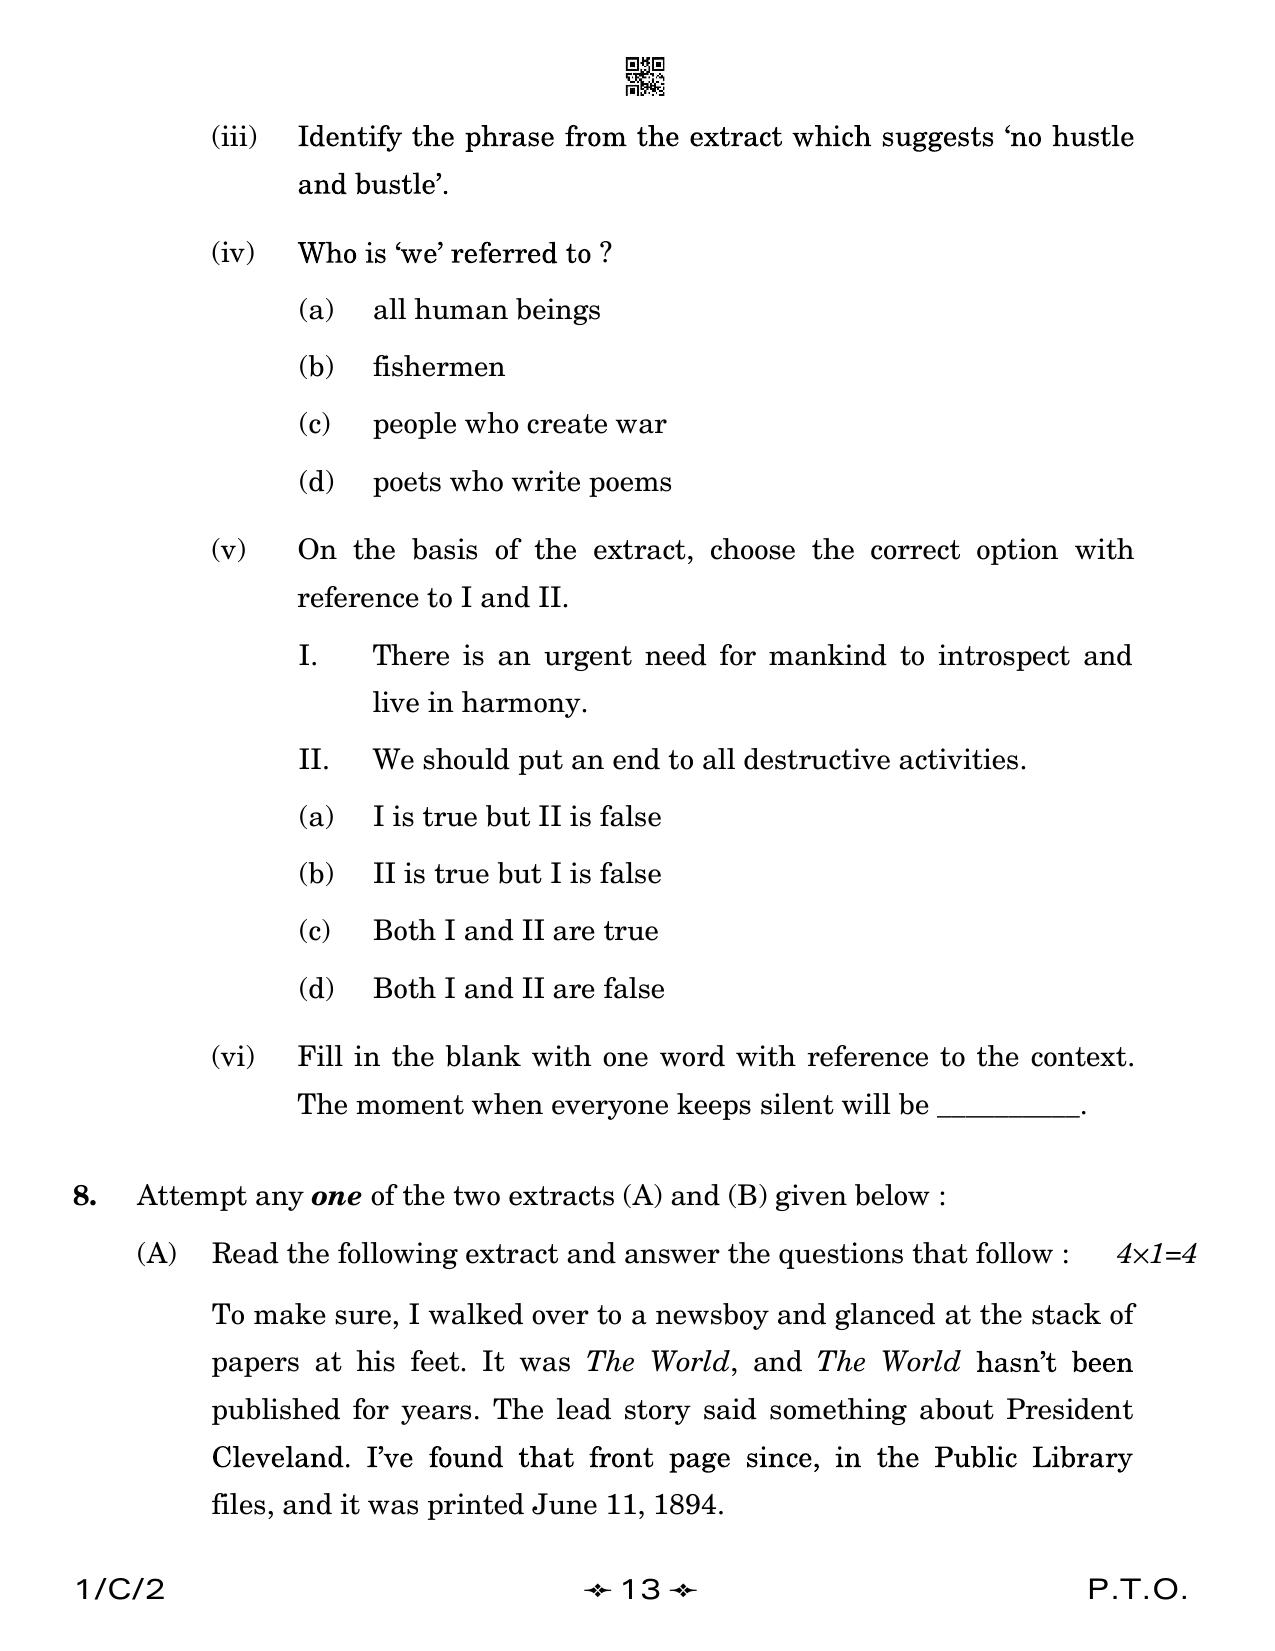 CBSE Class 12 1-2 English Core 2023 (Compartment) Question Paper - Page 13